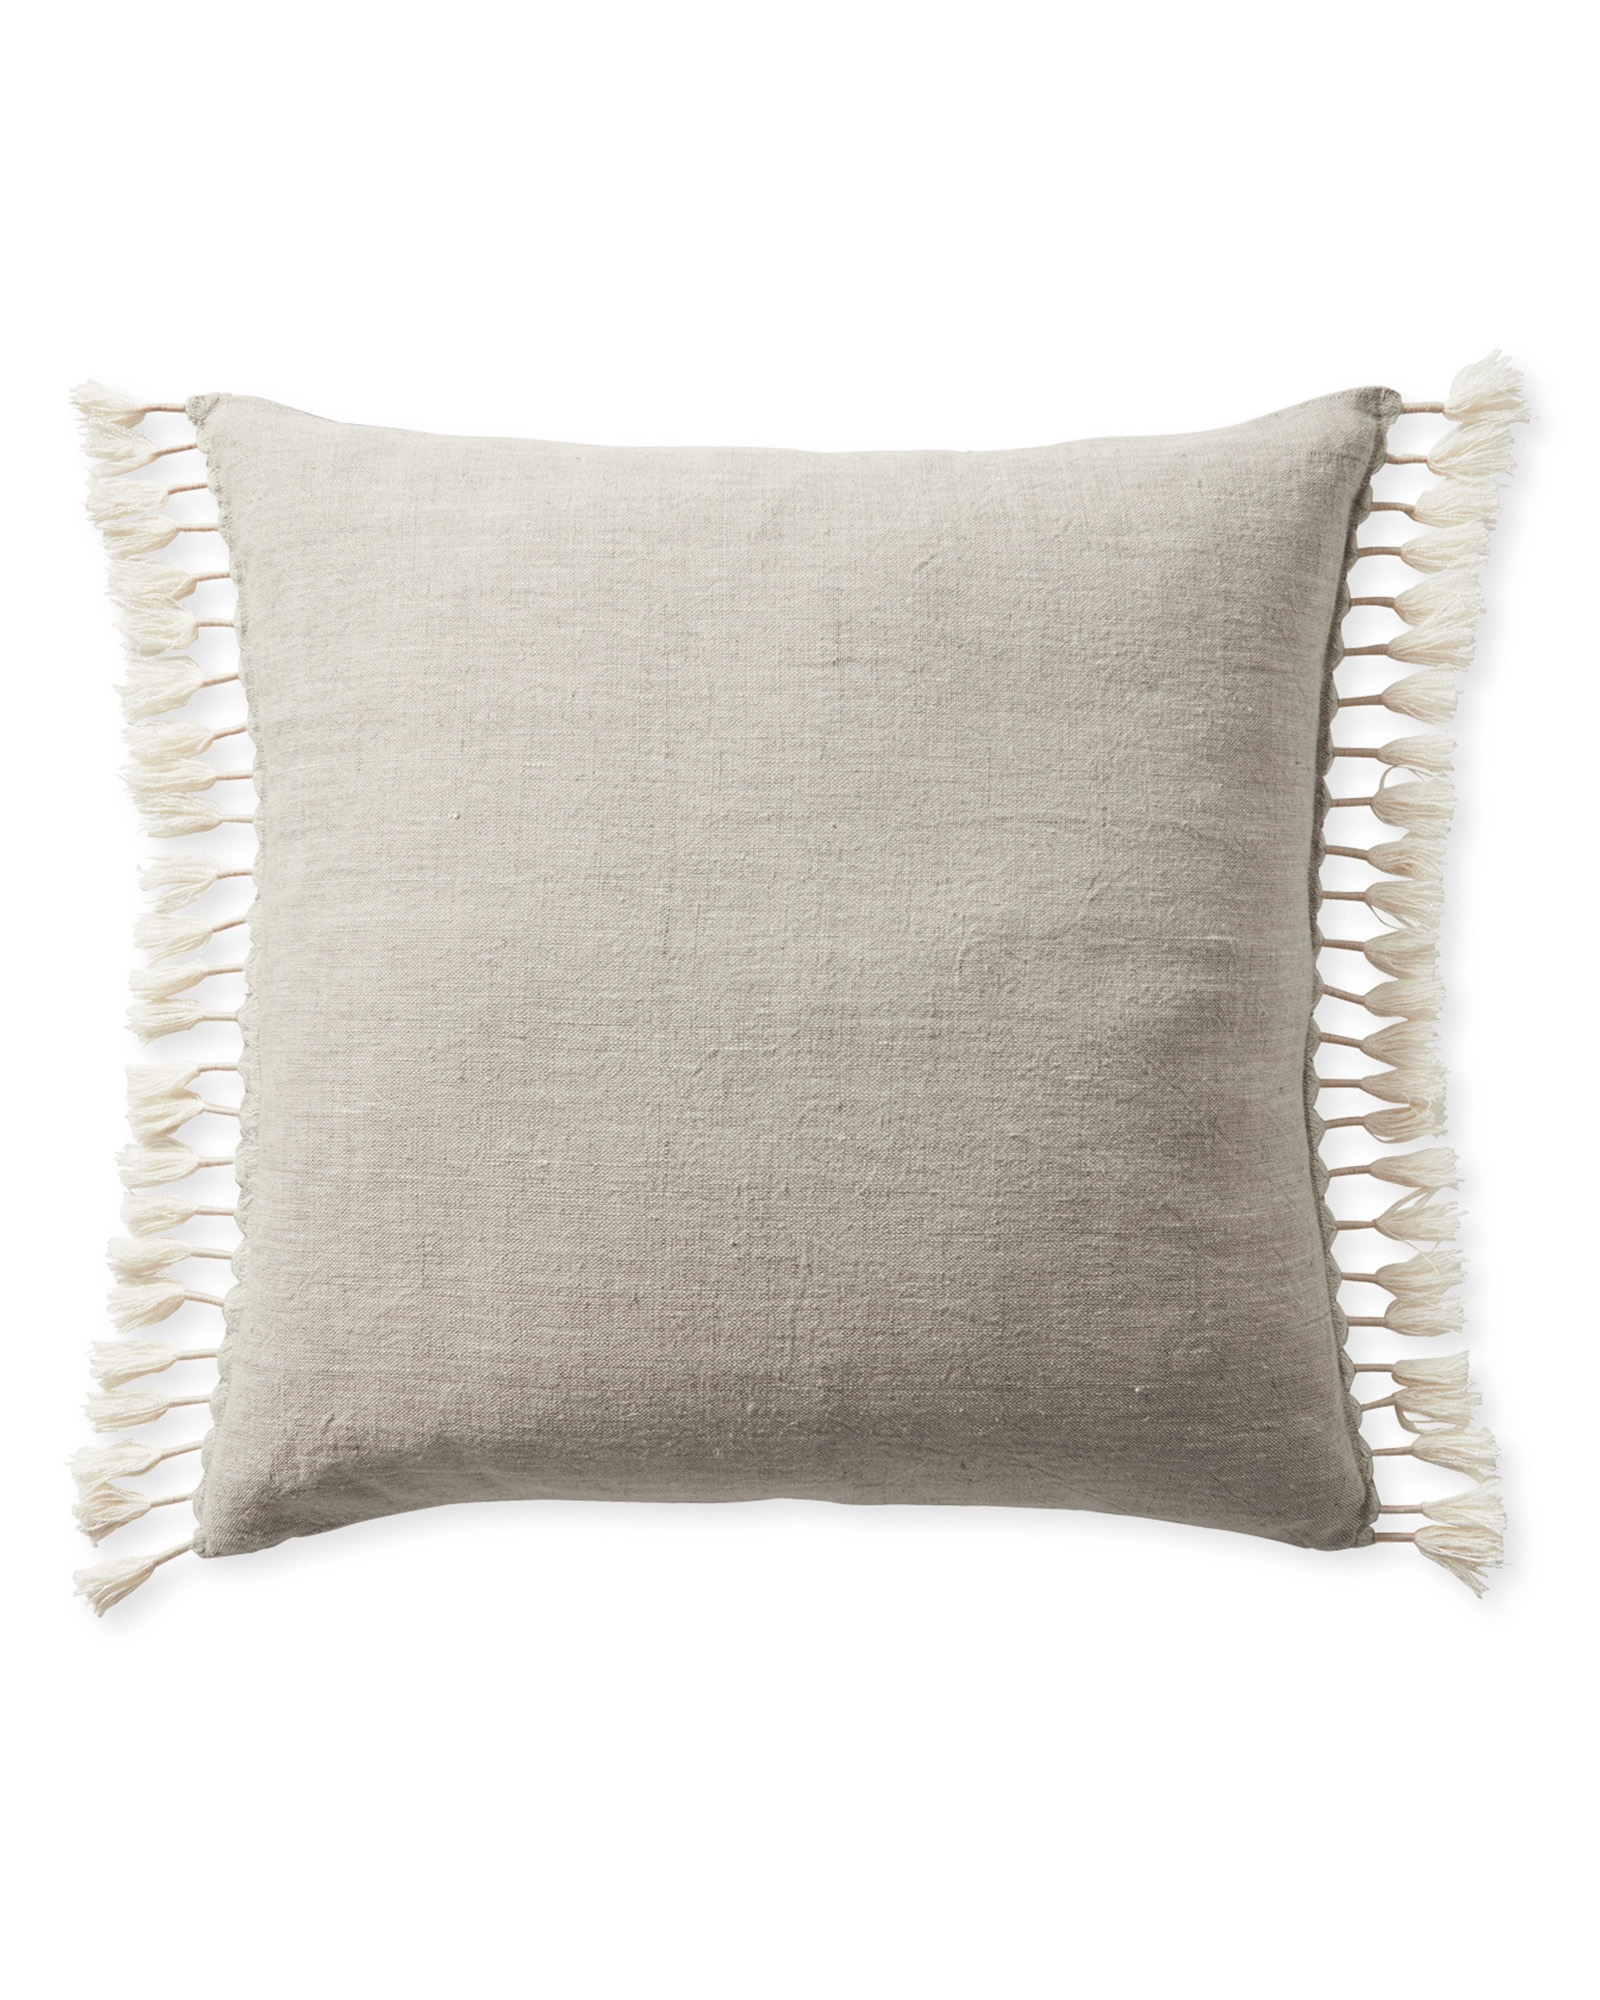 Topanga 24" SQ Pillow Cover - Ivory - Insert sold separately - Image 0